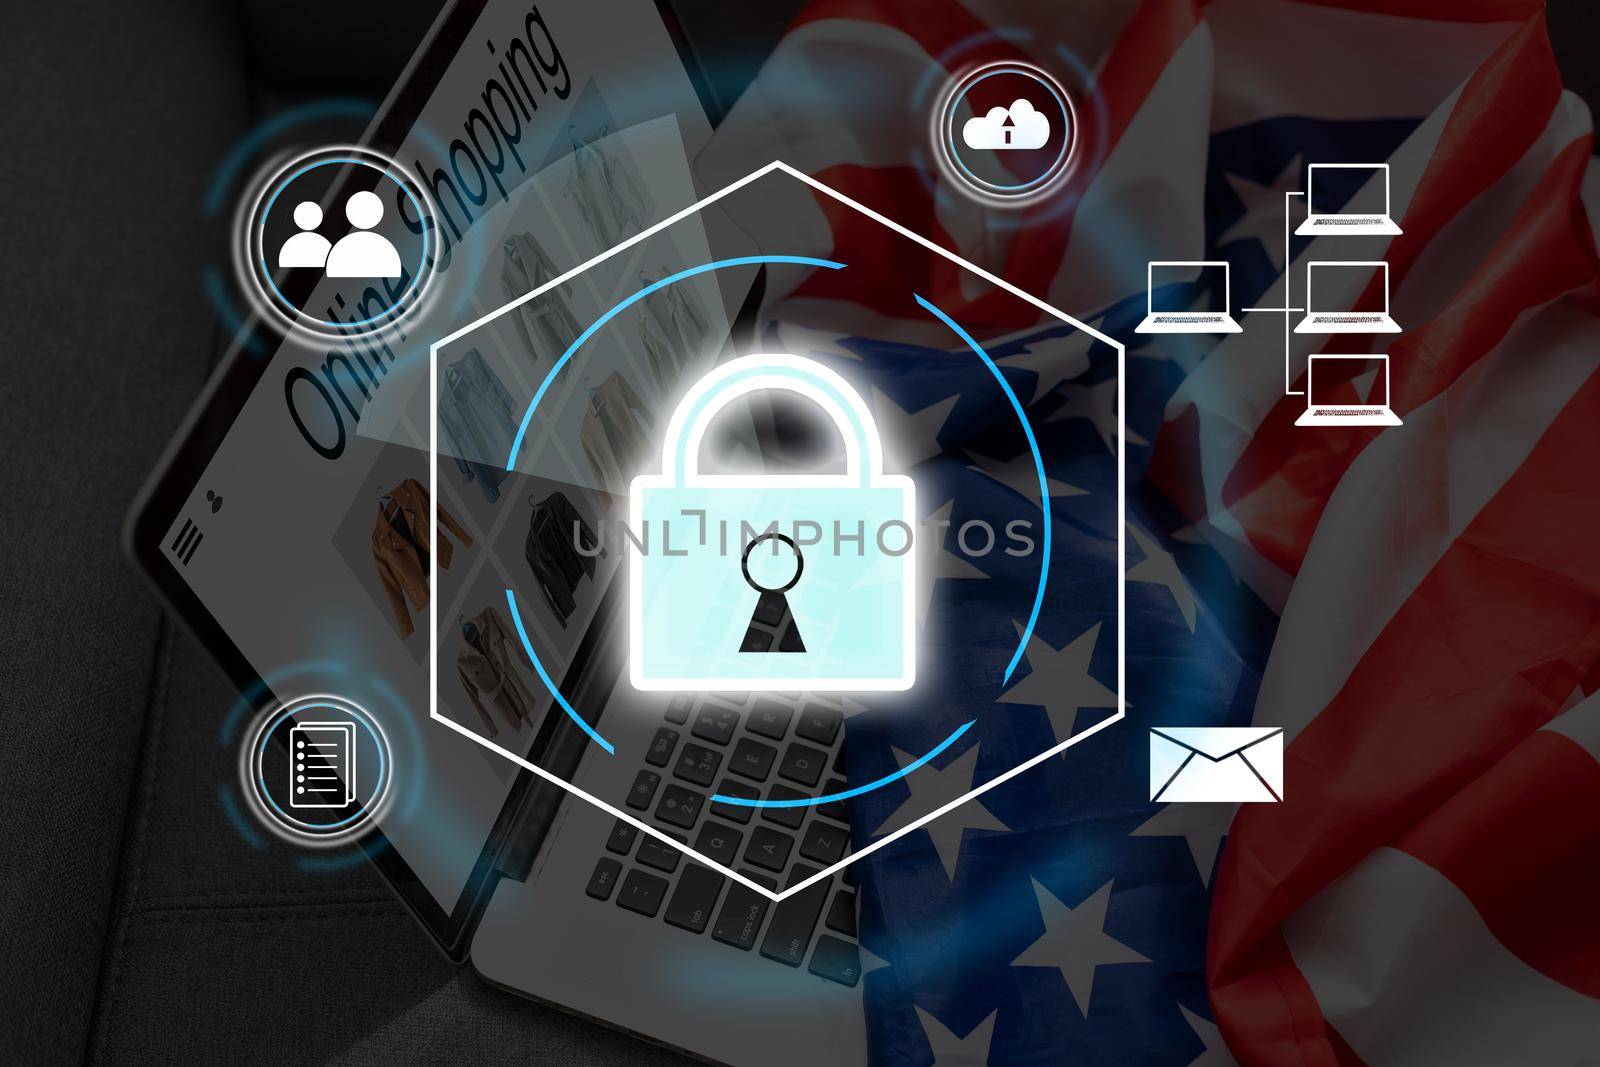 Digital padlock icon, cyber security network and data protection technology on virtual interface screen. Online internet authorized access against cyber attack.and business data privacy concept. by Andelov13